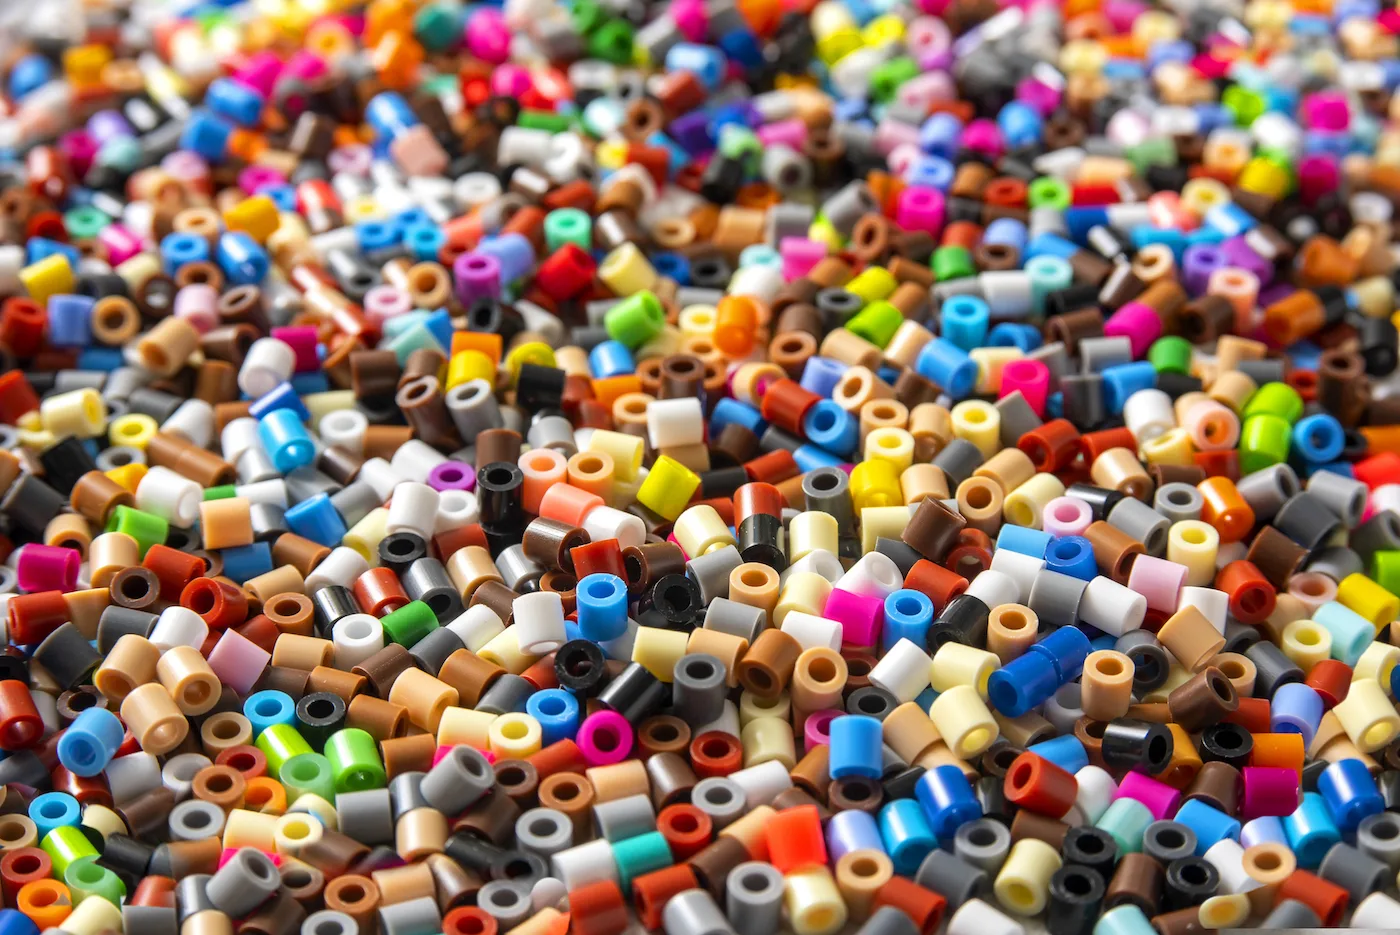 Perler Beads: How to Iron them Perfectly 